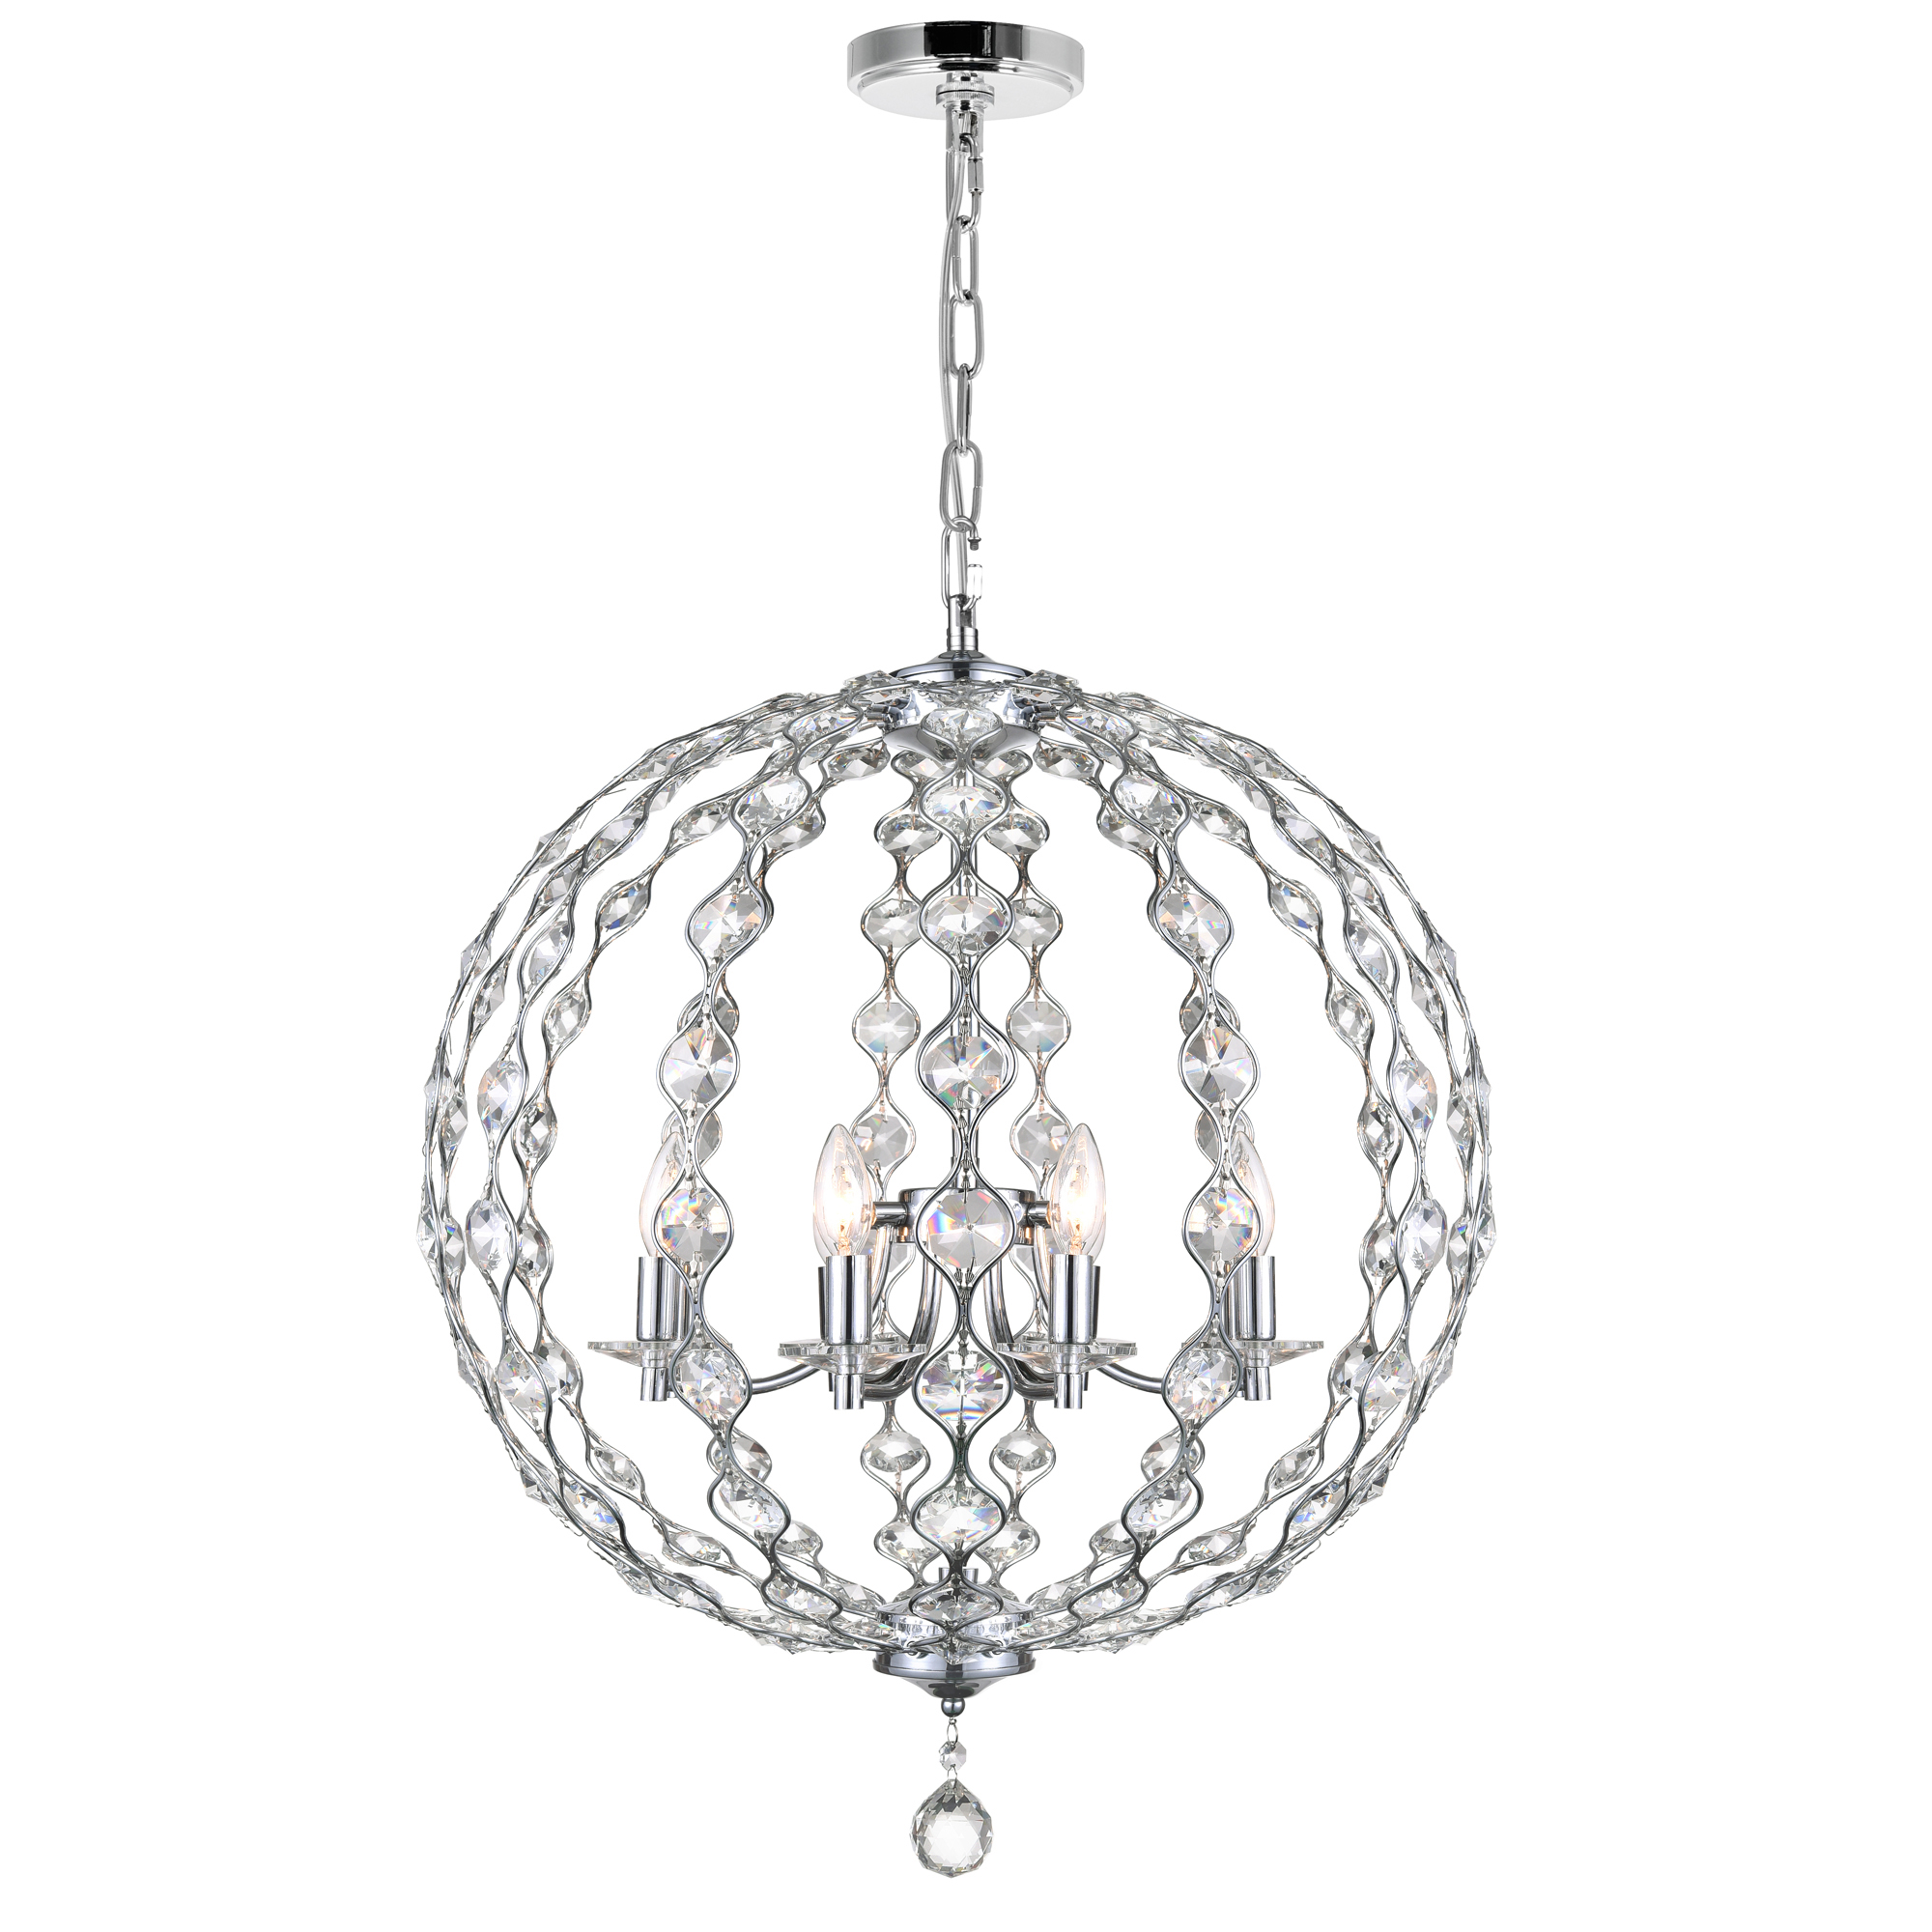 Esia 8 Light Chandelier With Chrome Finish